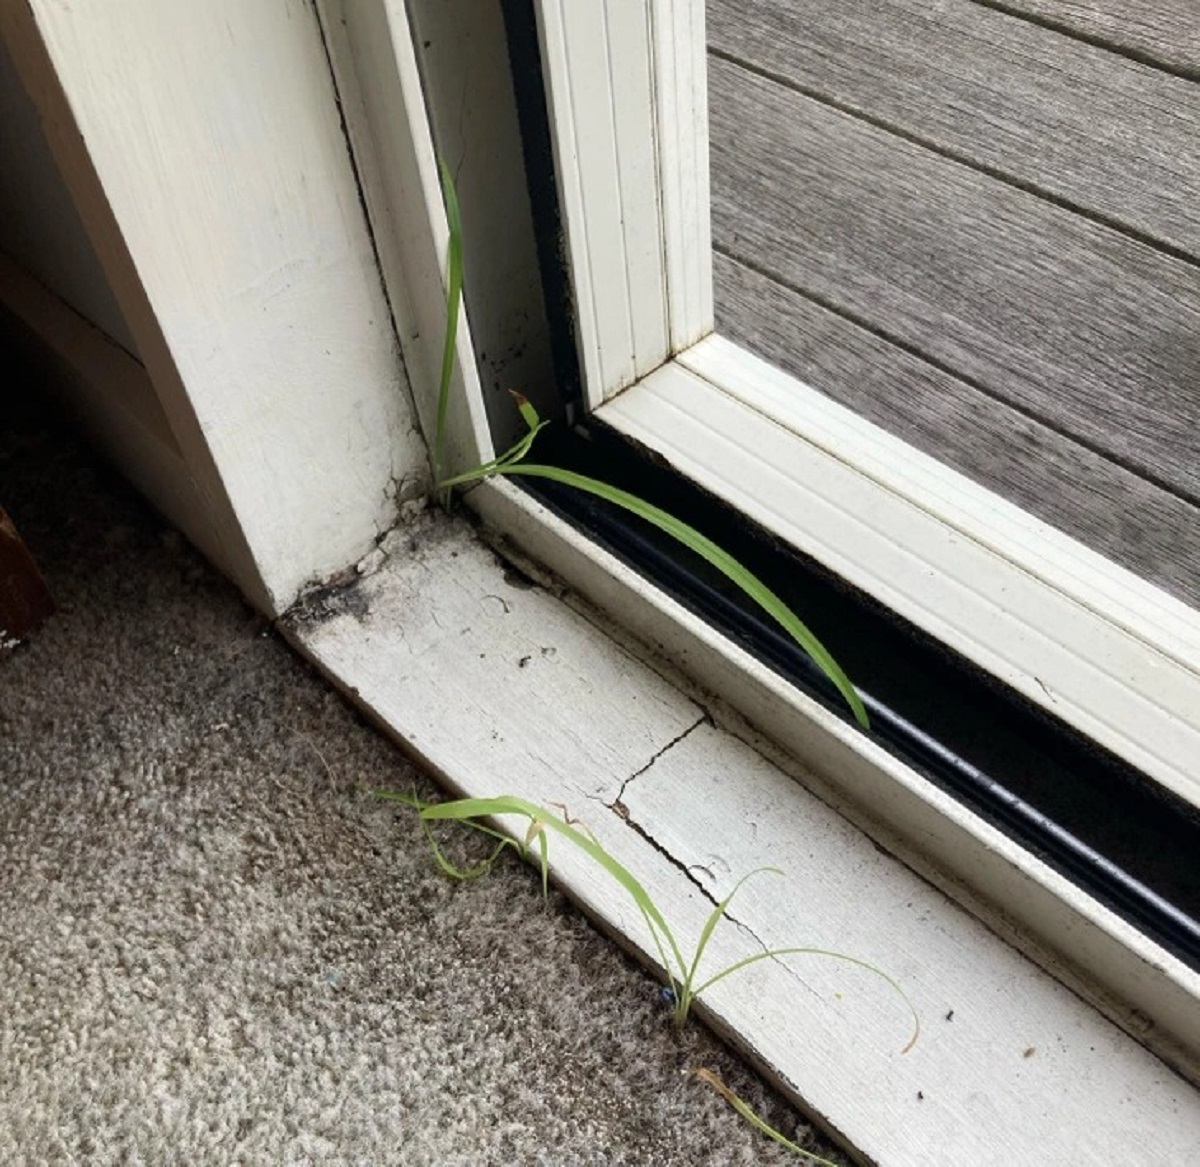 “Actual grass growing through the carpet in my bedroom. Rental property, so not much I can do except pluck it when it grows.”